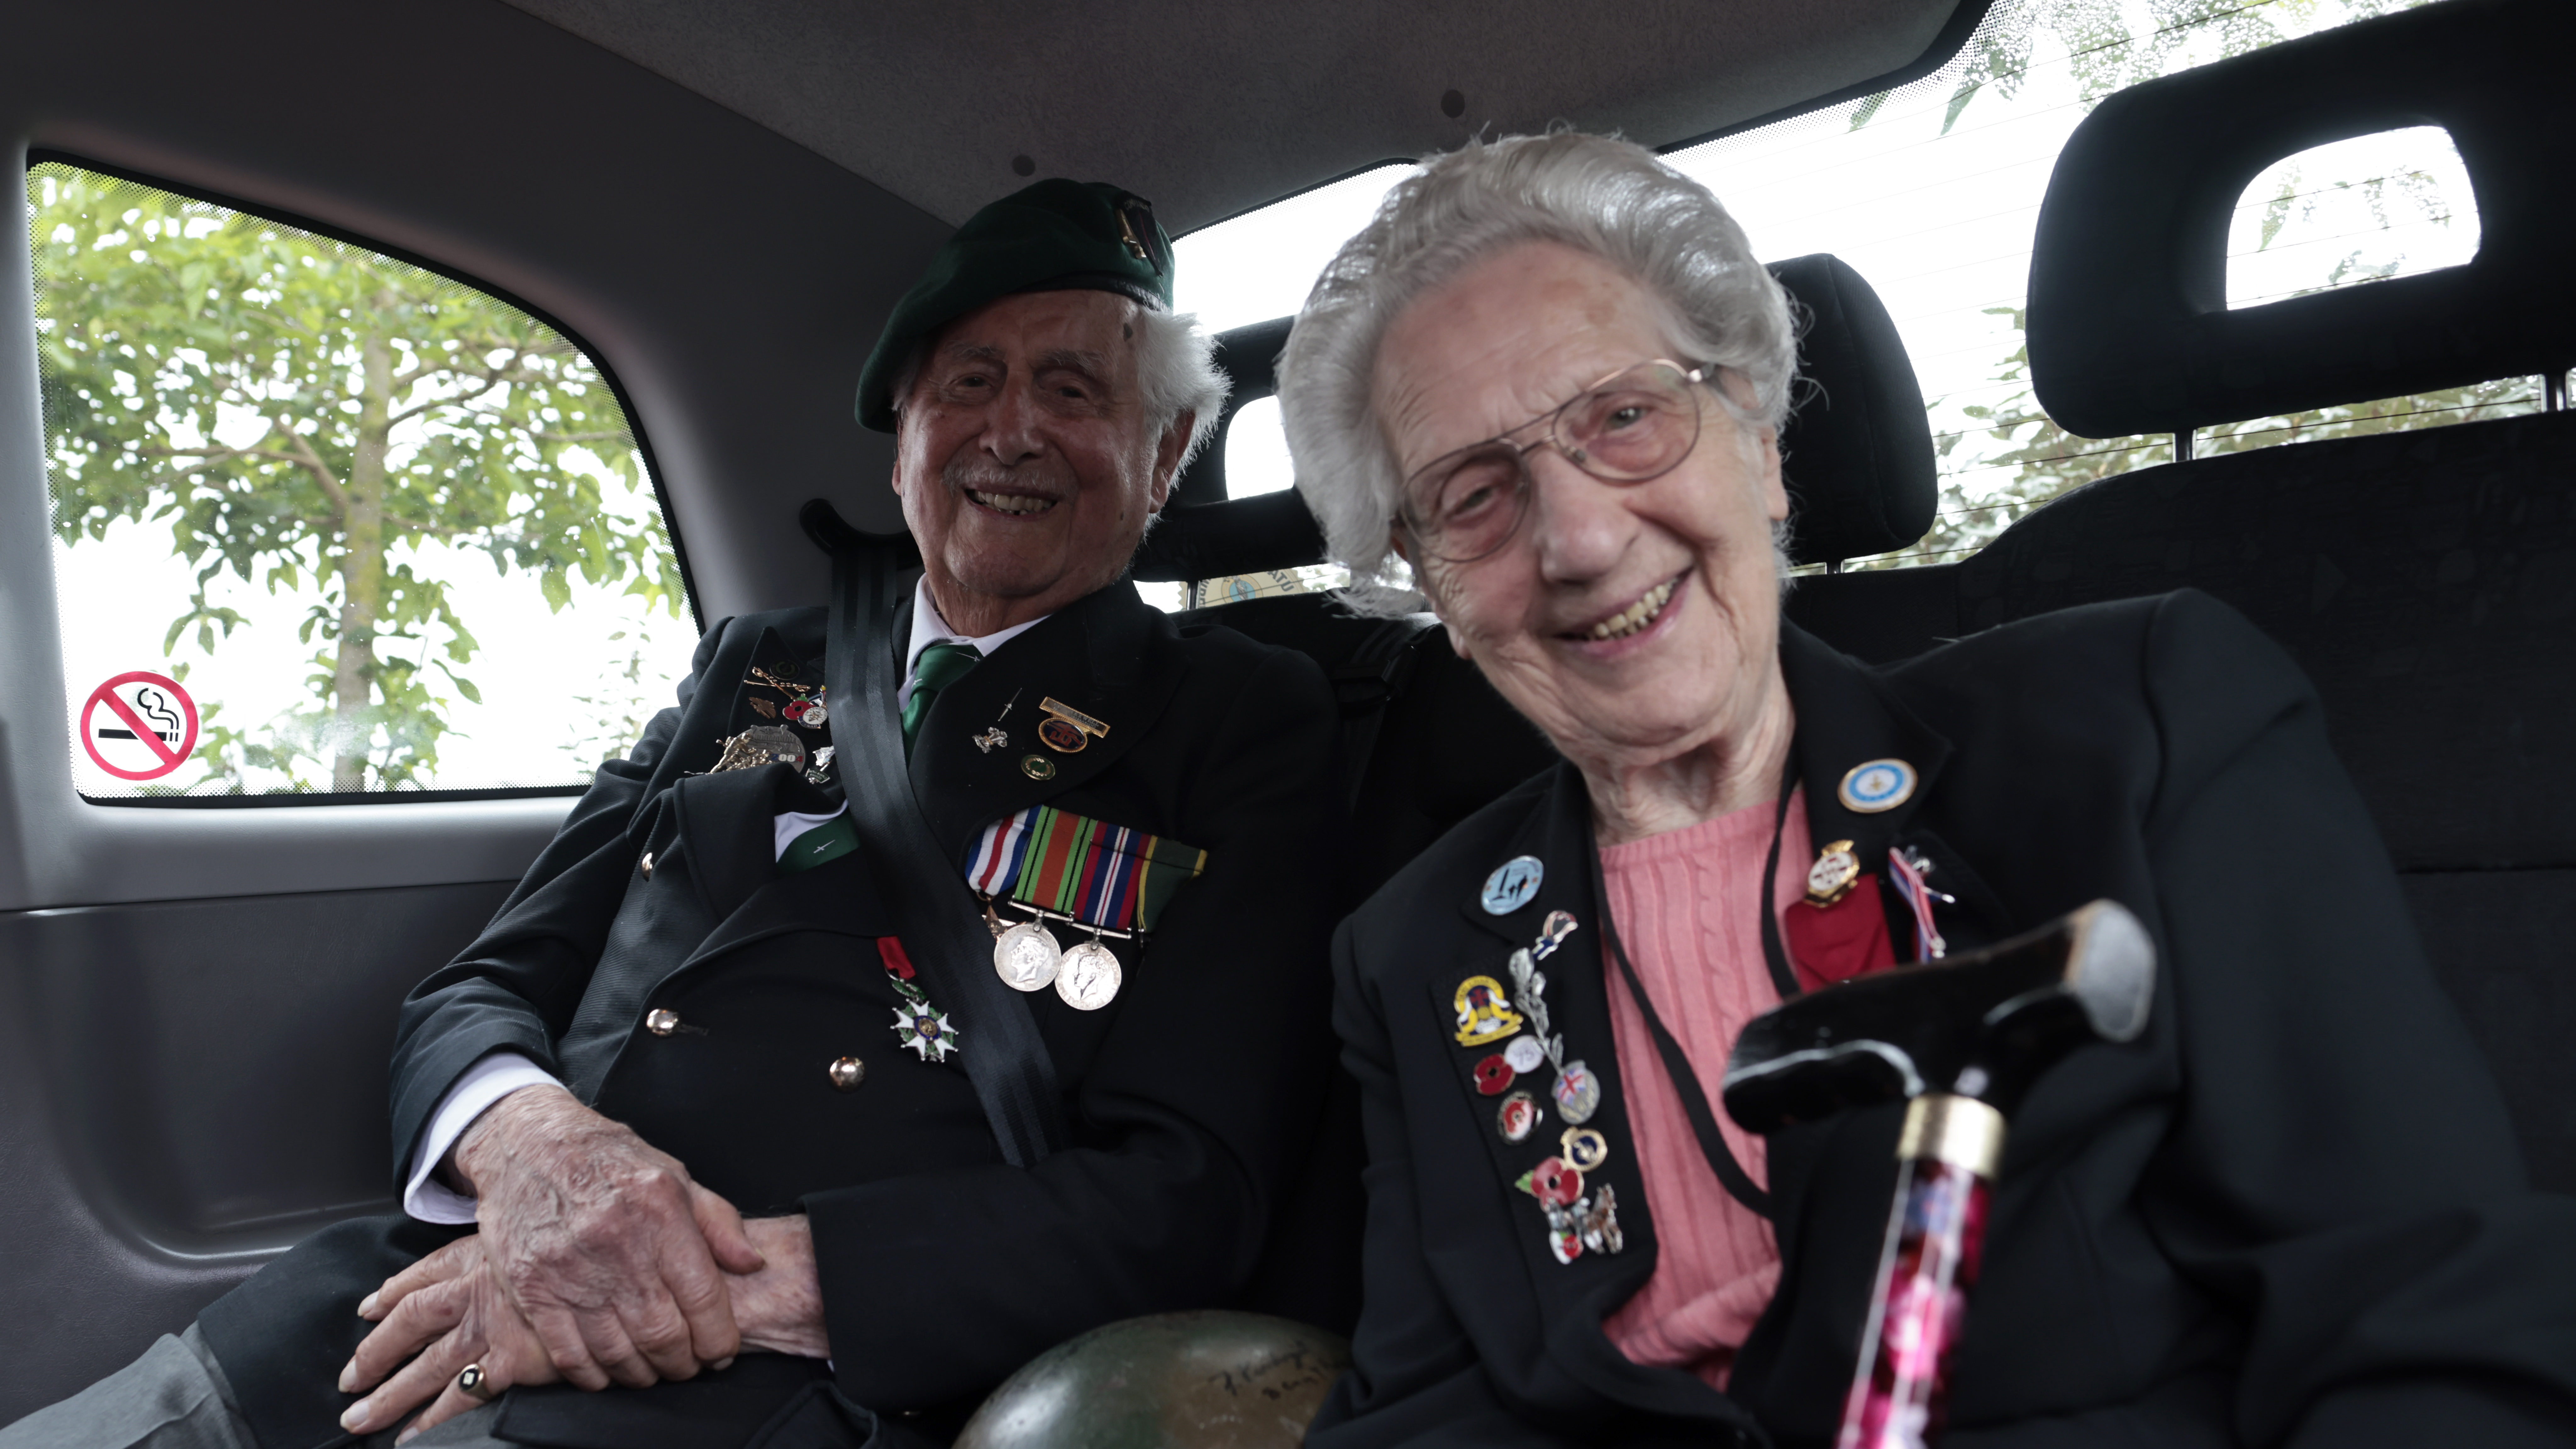 British veterans Roy Maxwell and Mary Scott arrive in a British Taxi Charity for Military Veterans ...